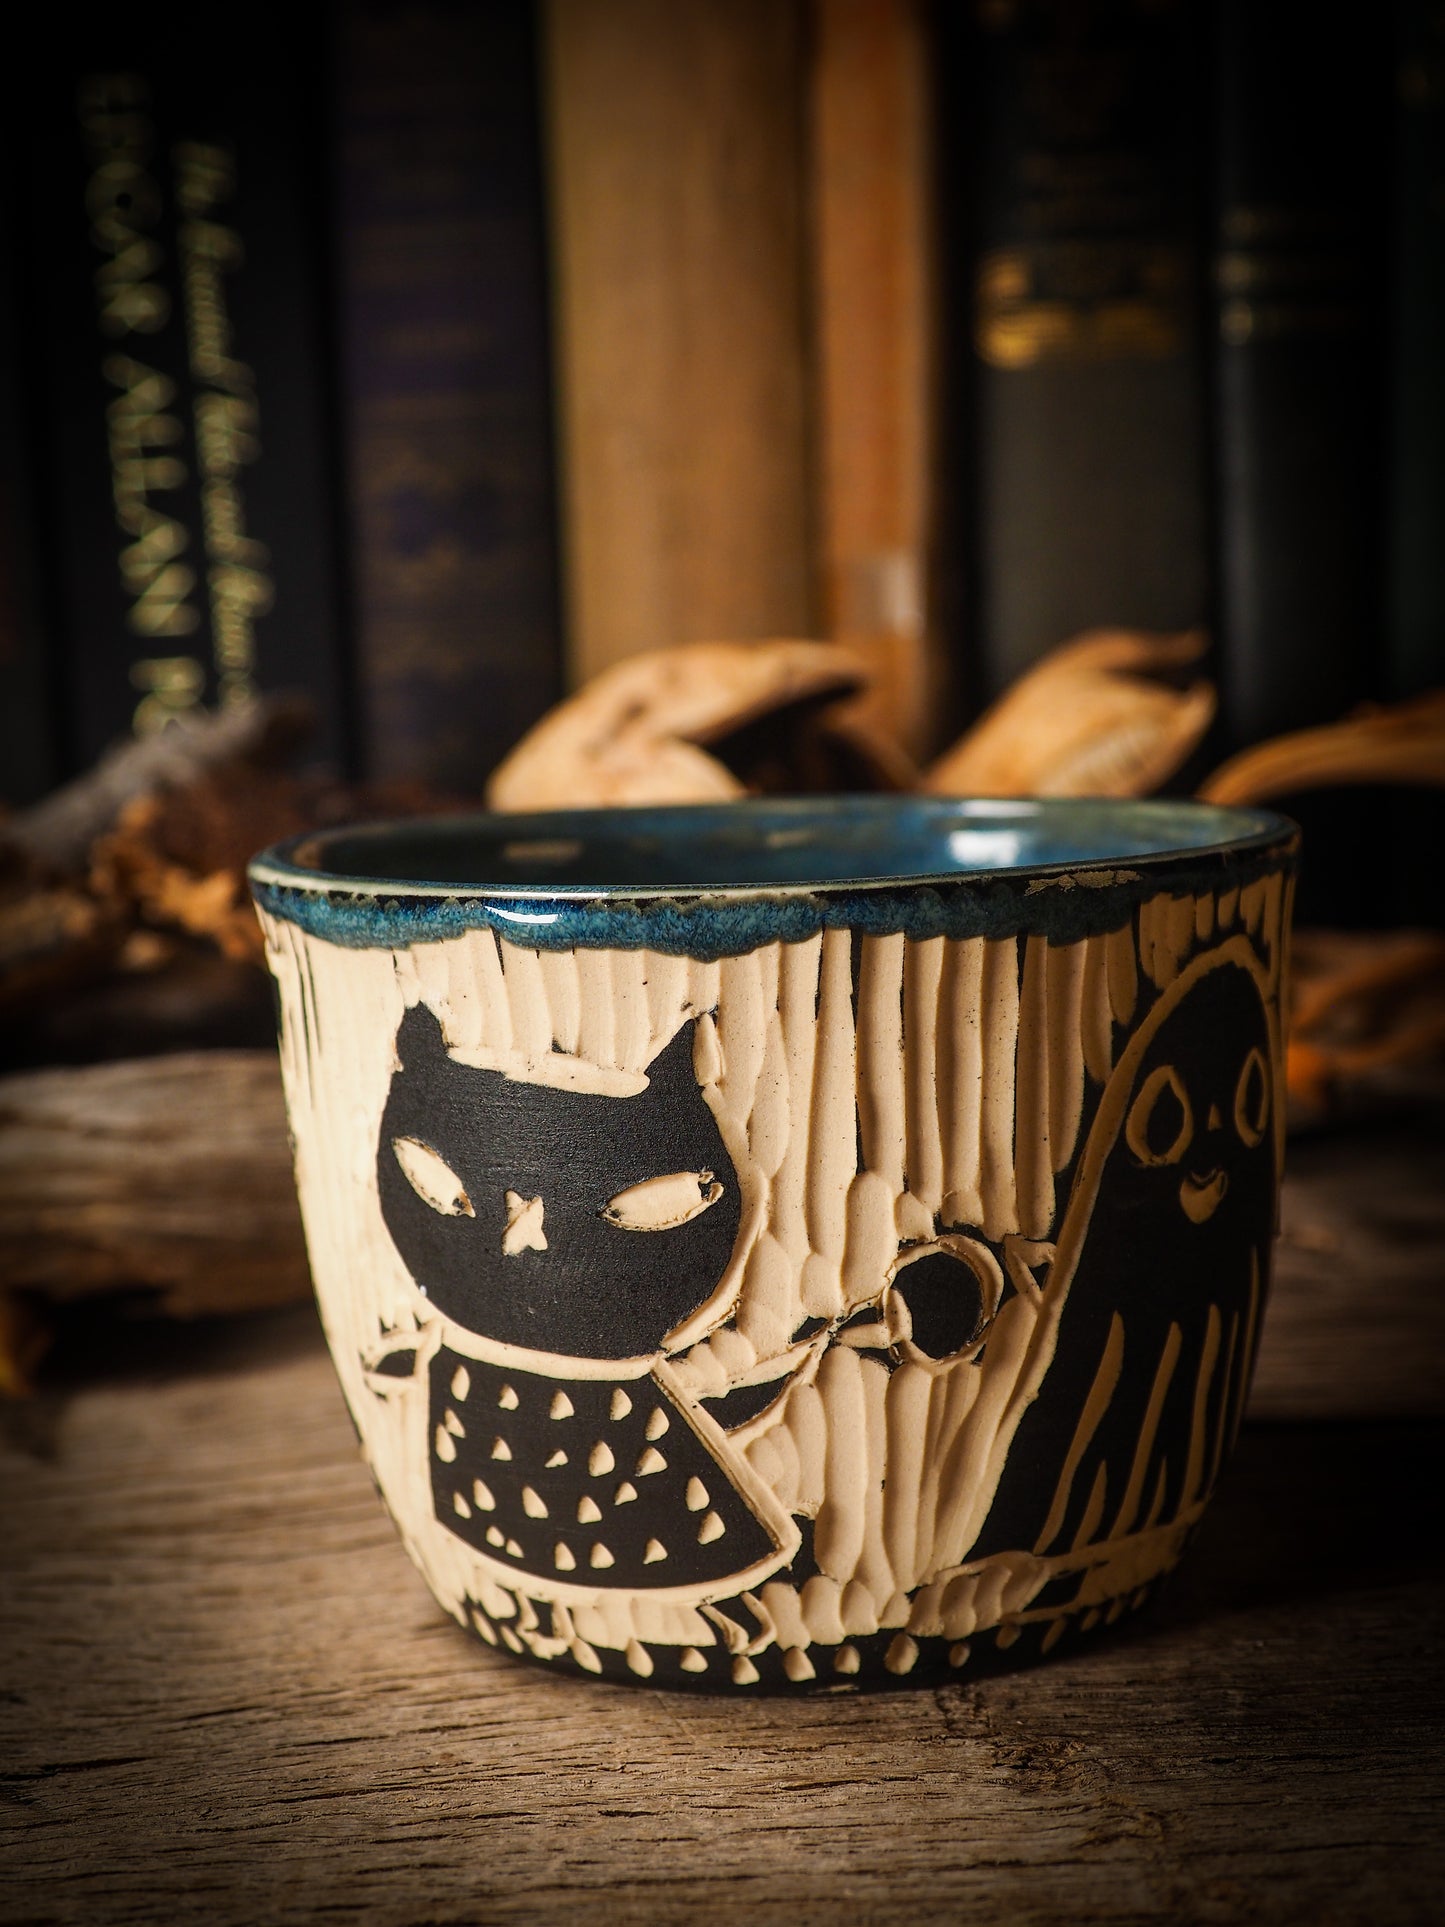 Fire glazed ceramic coffee mug by Idania Salcido, Danita Art. On Halloween, Danita creates ceramic containers for pumpkin spice coffee, warm tea or sweets to give on trick-or-treat night. With carved with Halloween ghosts, skeletons, witches, ghouls, black cats, jack-o-lanterns, item is food safe, hand wash only.